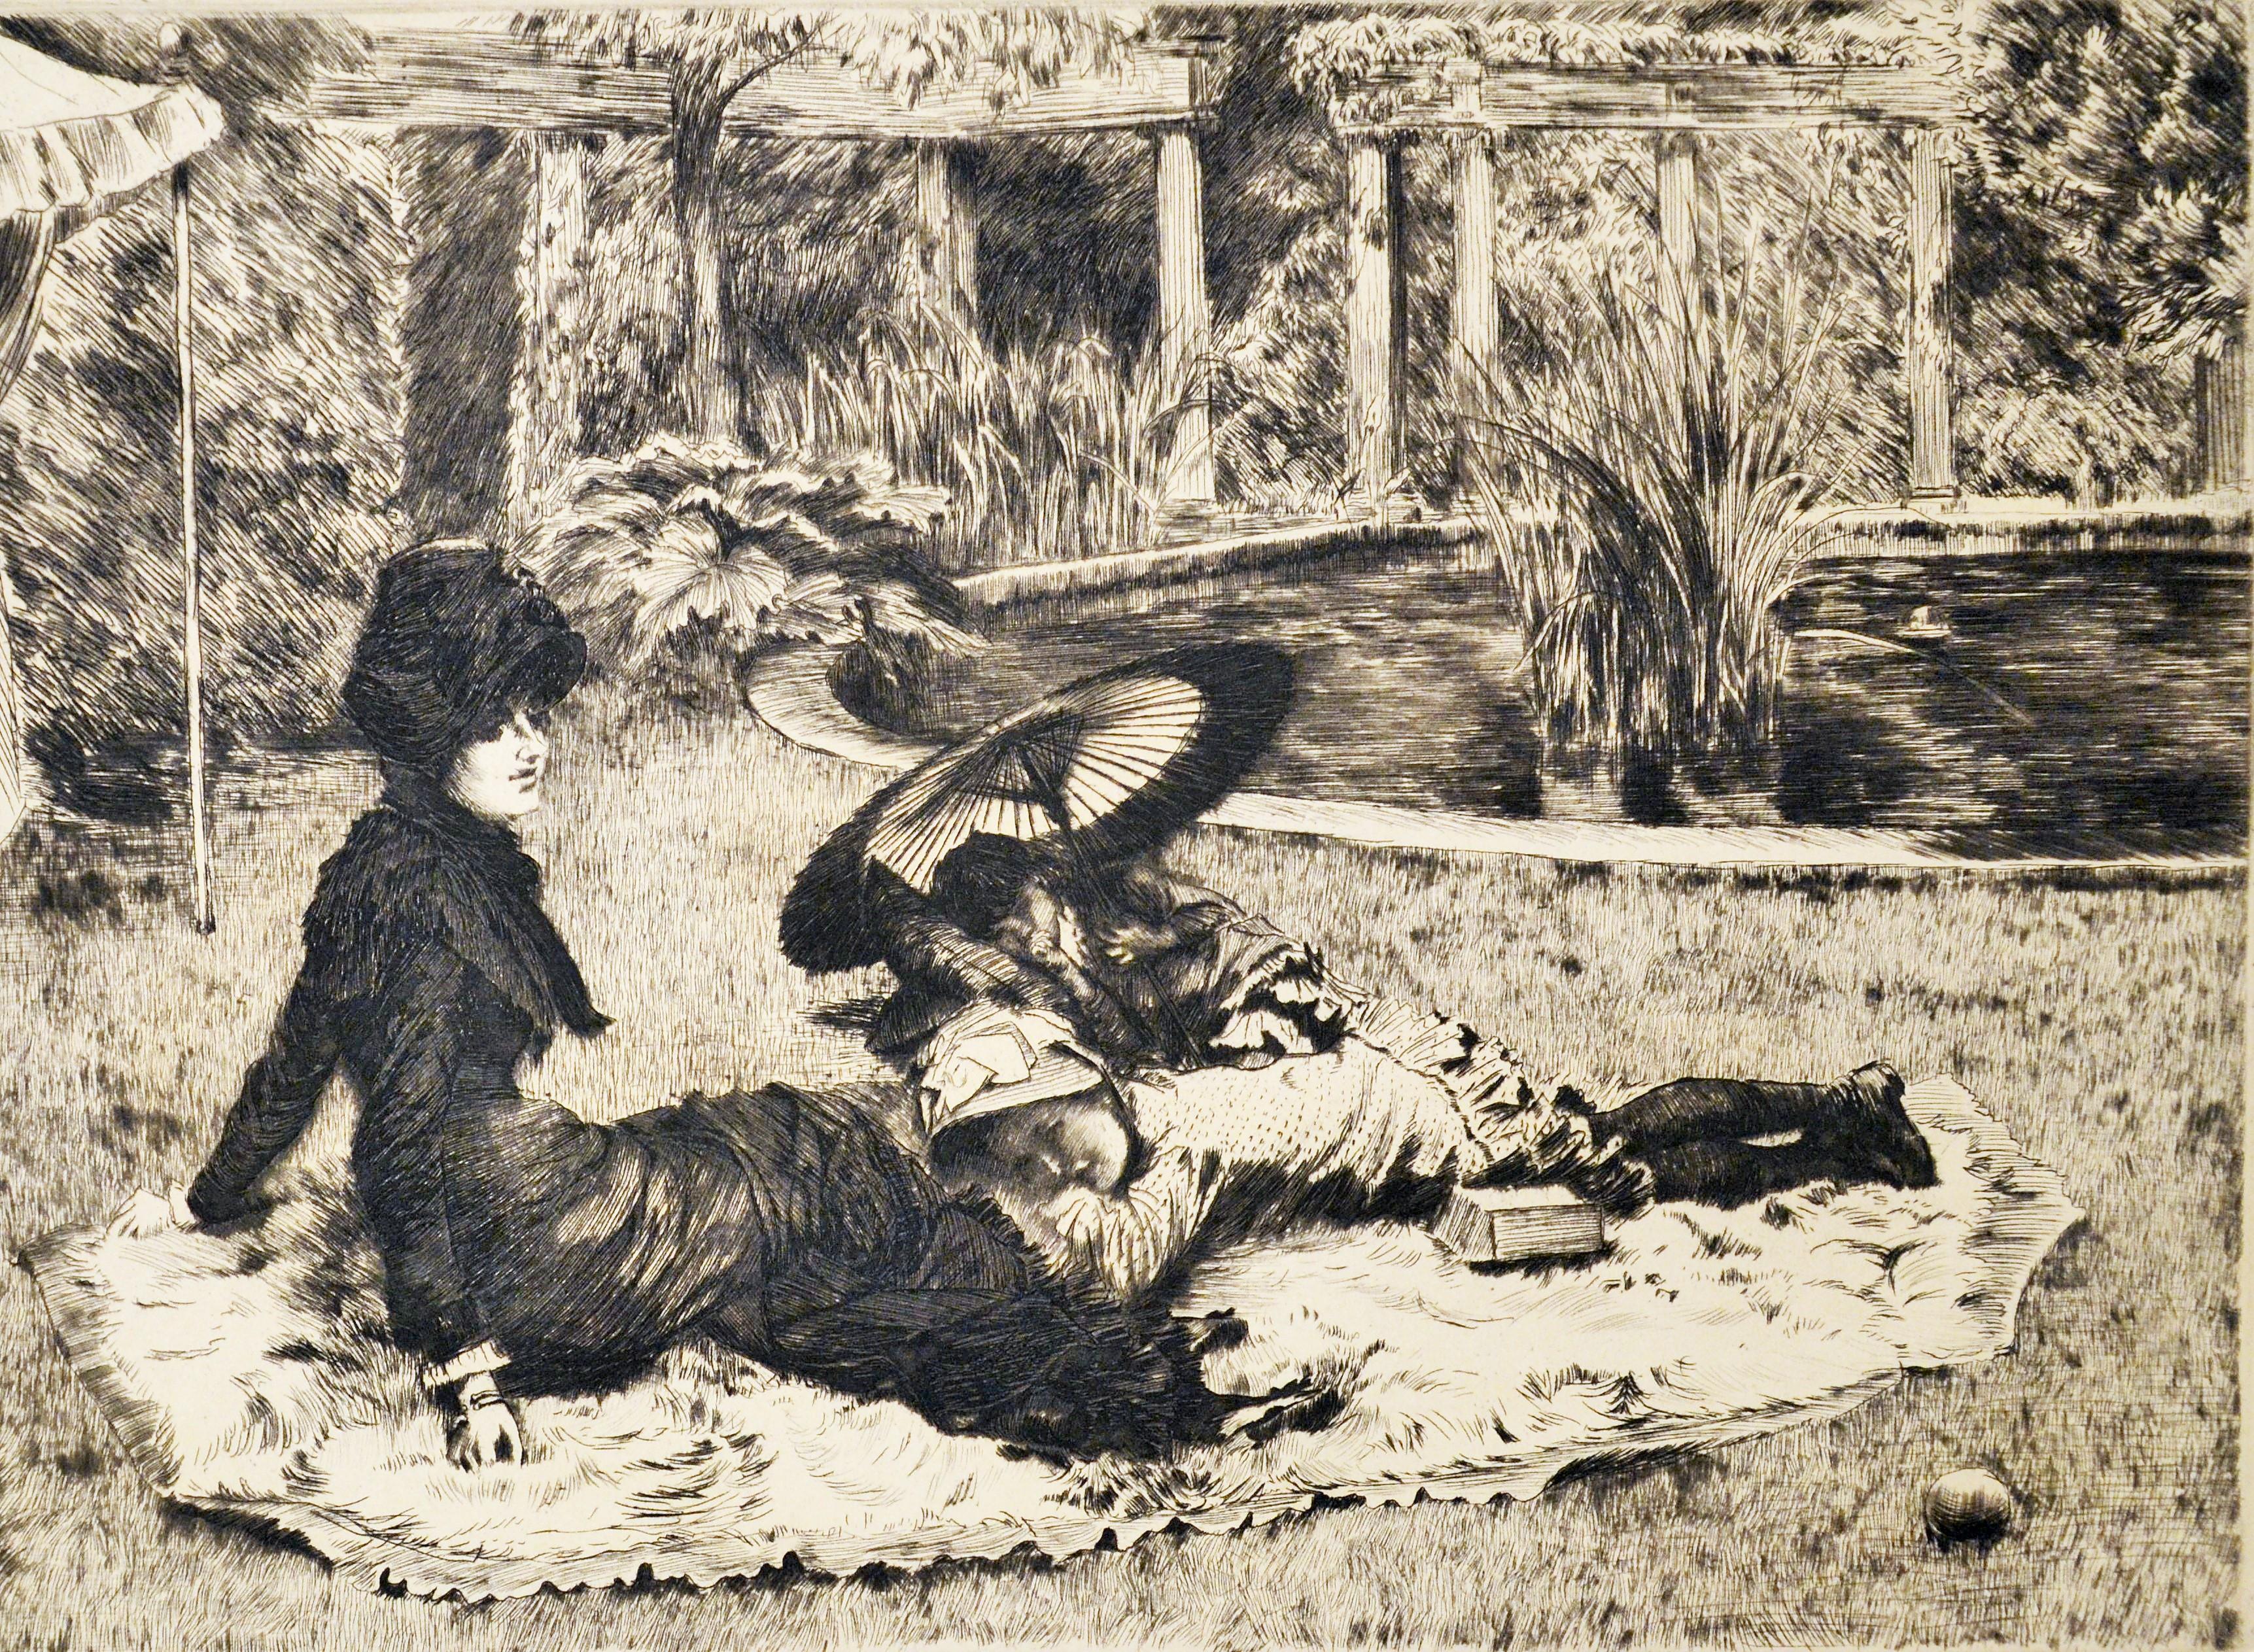 On the Grass - Etching and Drypoint by J. Tissot - 1880 - Print by James Tissot